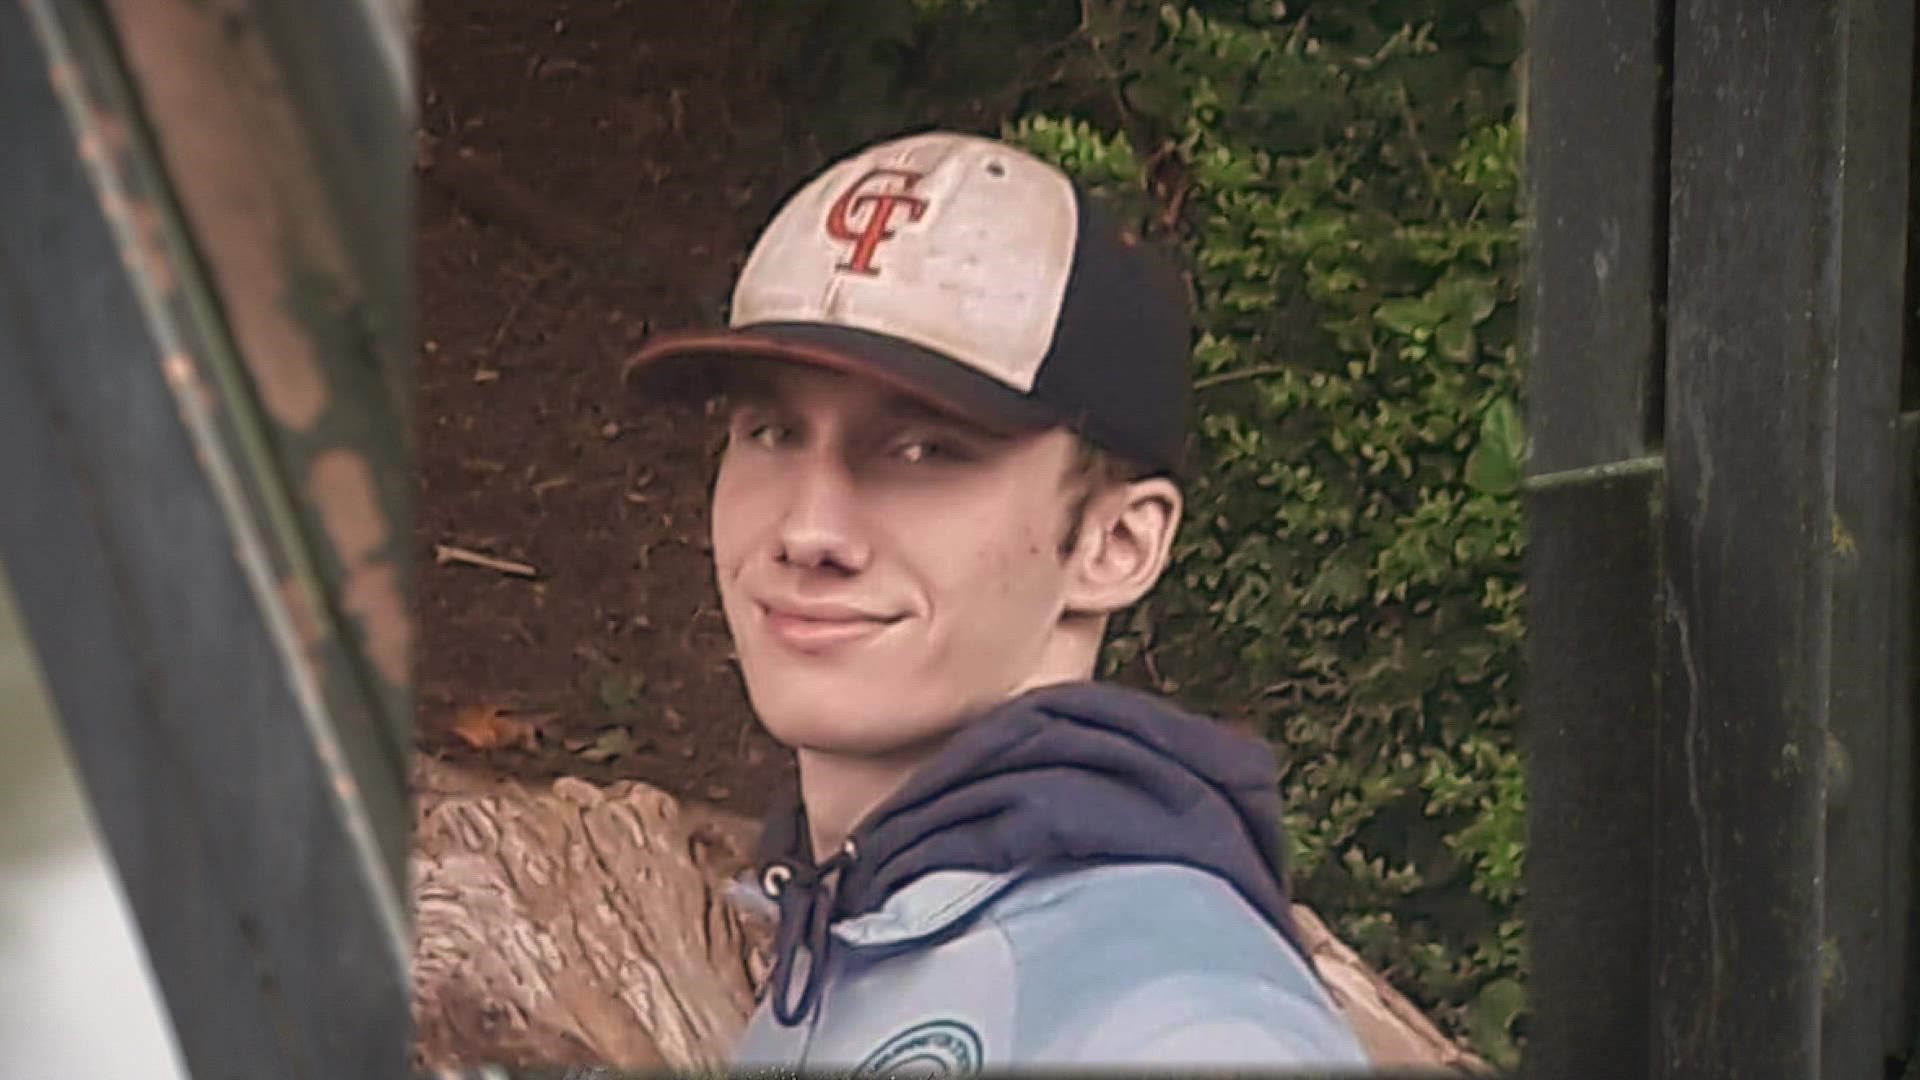 Zack Rager drowned in Chehalis River last March. A coroner determined the teen suffered cold water shock, which made him unable to swim.